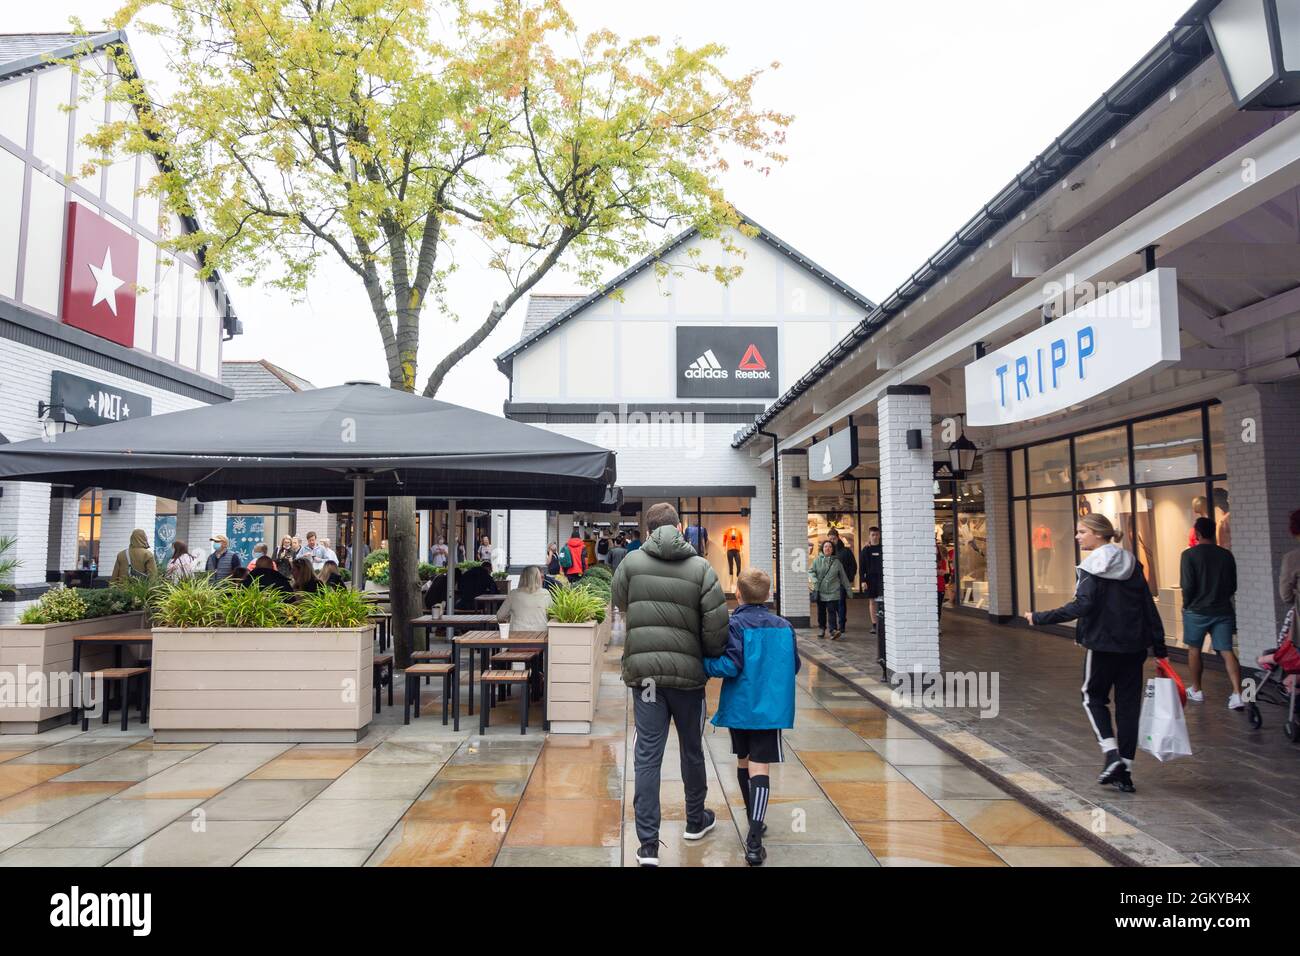 Cheshire Oaks Designer Outlet, Kinsey Road, Wirral, Merseyside, Inghilterra, Regno Unito Foto Stock